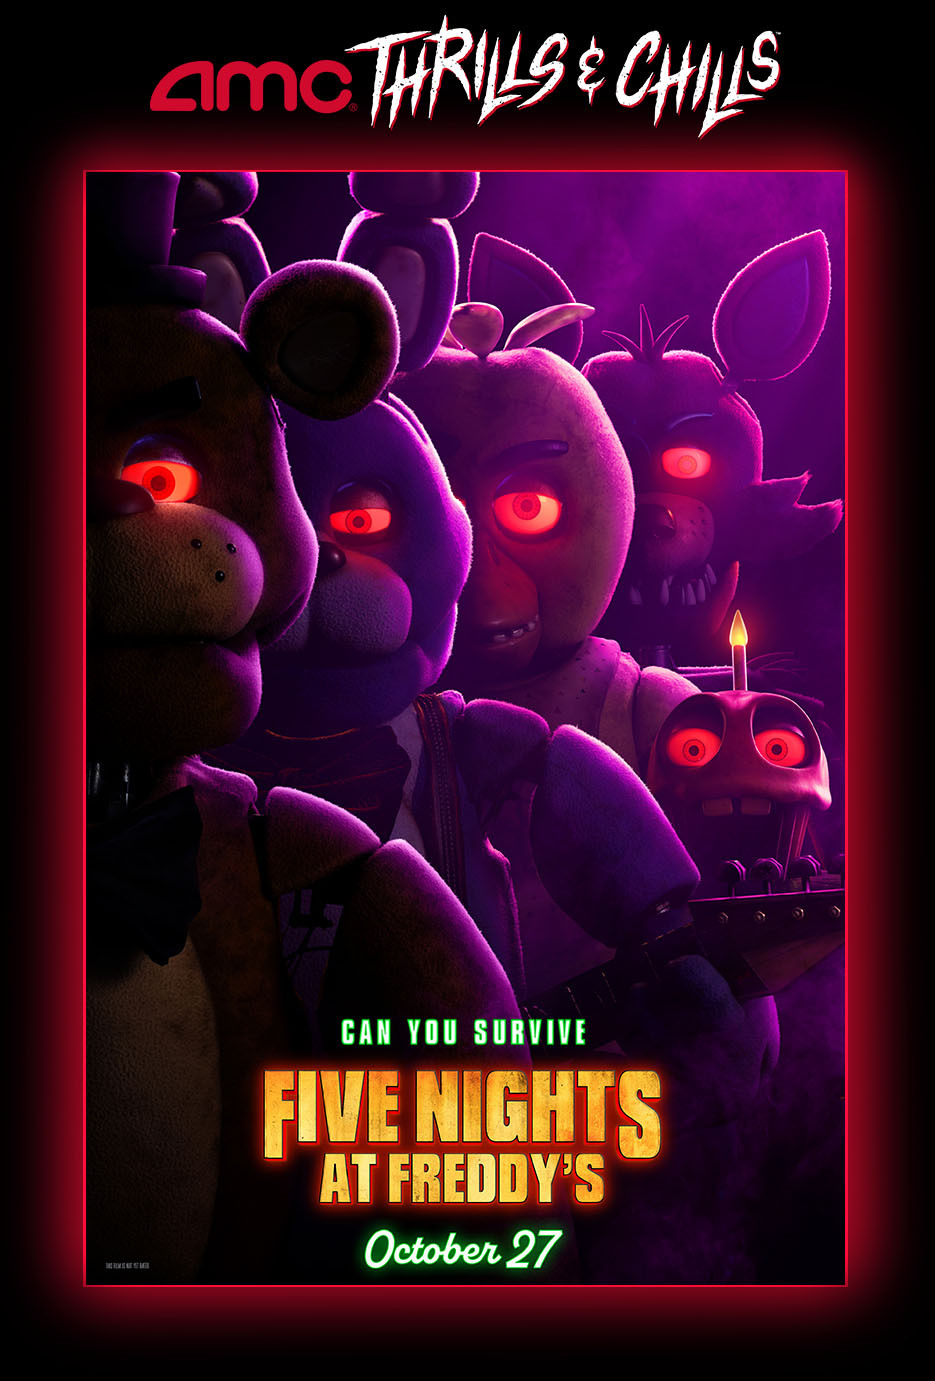 Five Nights at Freddy's at an AMC Theatre near you.